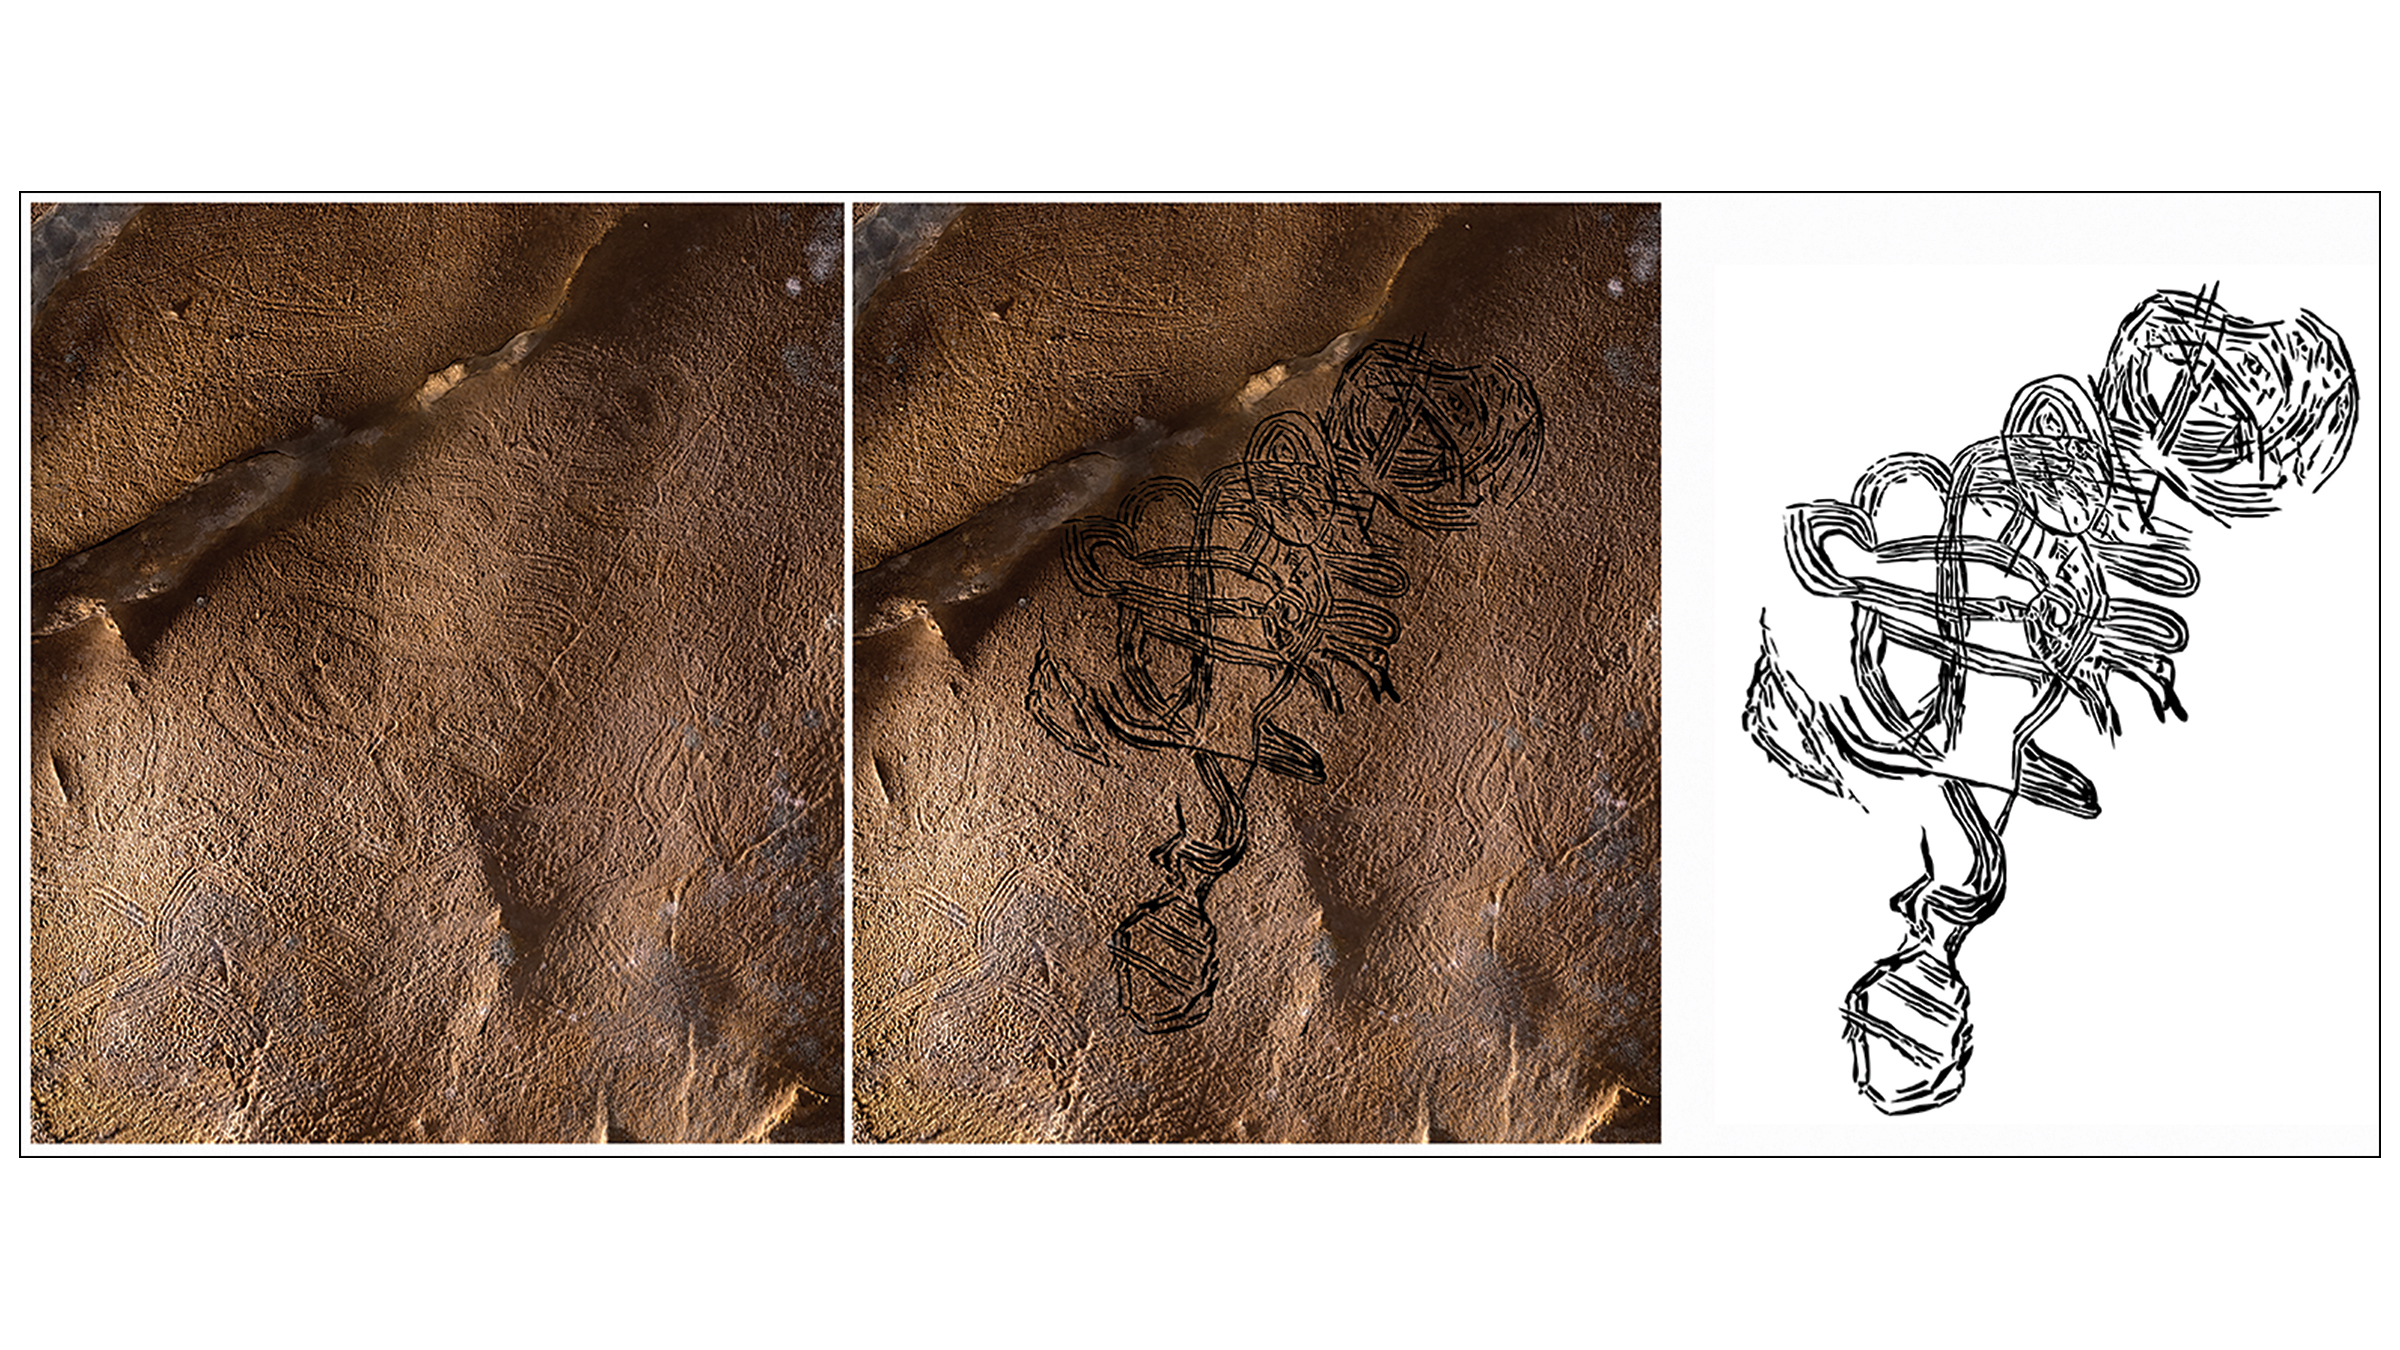 An enigmatic figure of swirling lines and a possible rattlesnake tail in the 19th unnamed cave in Alabama.